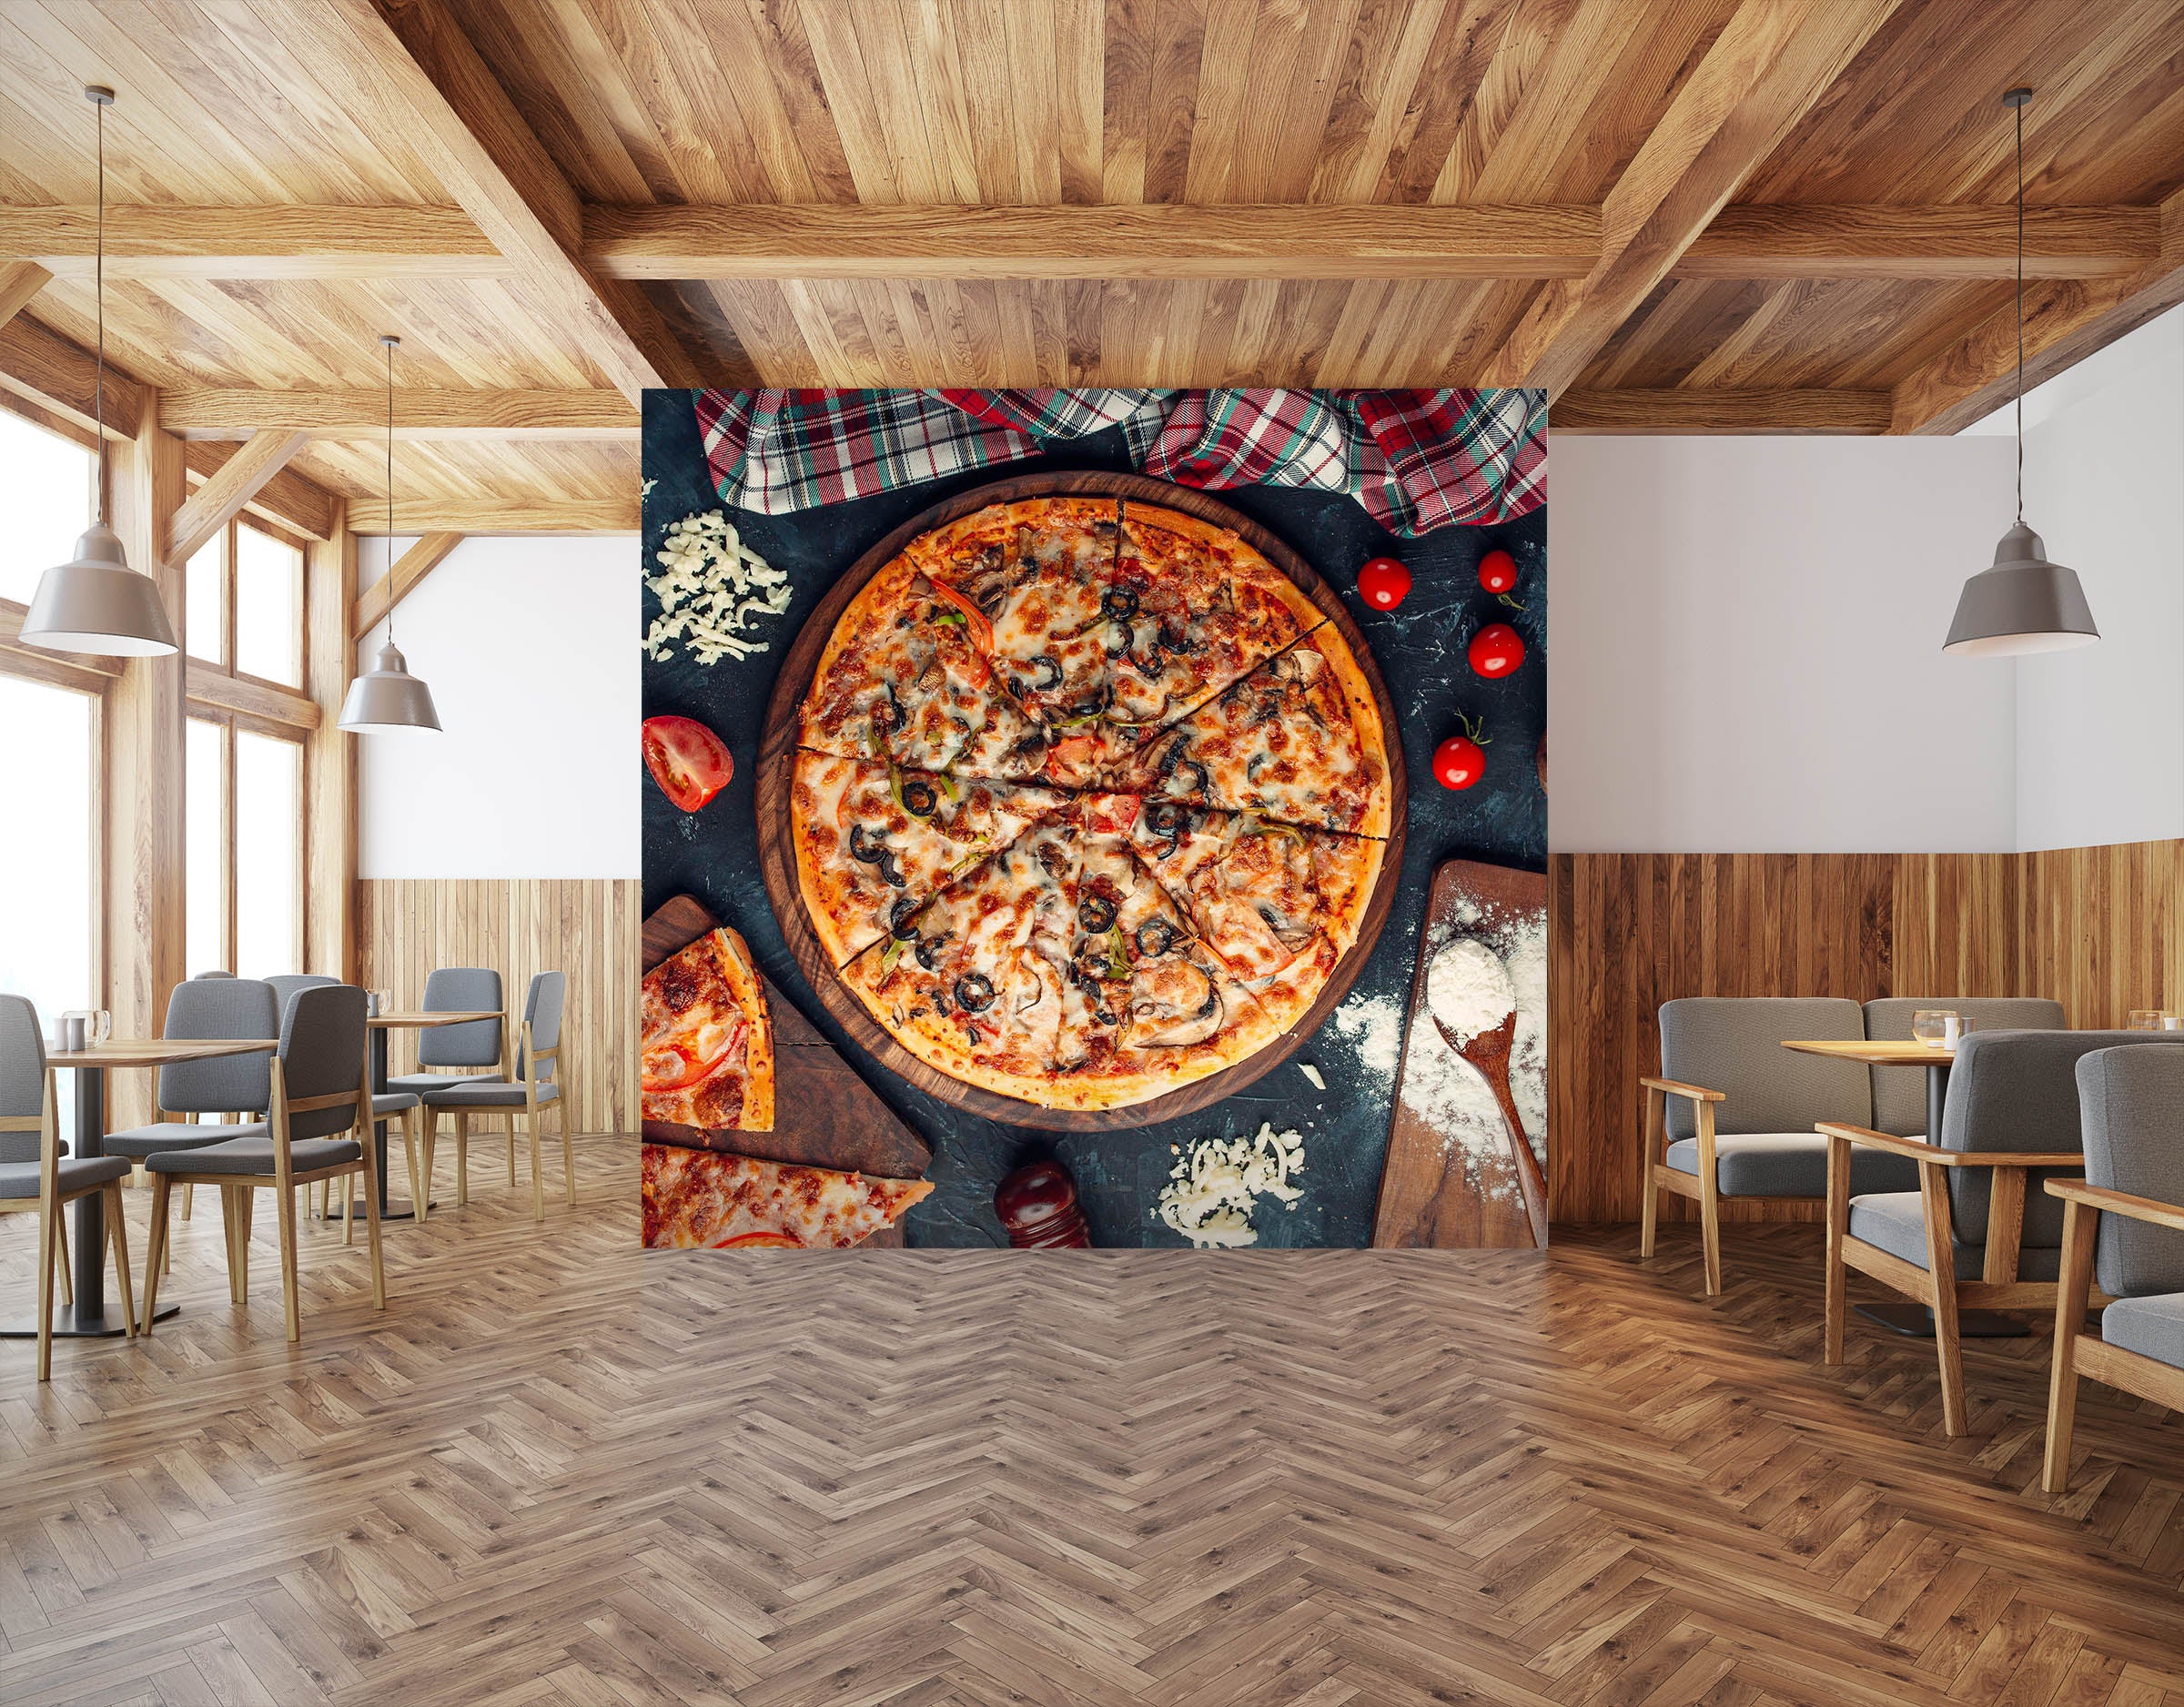 3D Freshly Baked Pizza 1452 Wall Murals